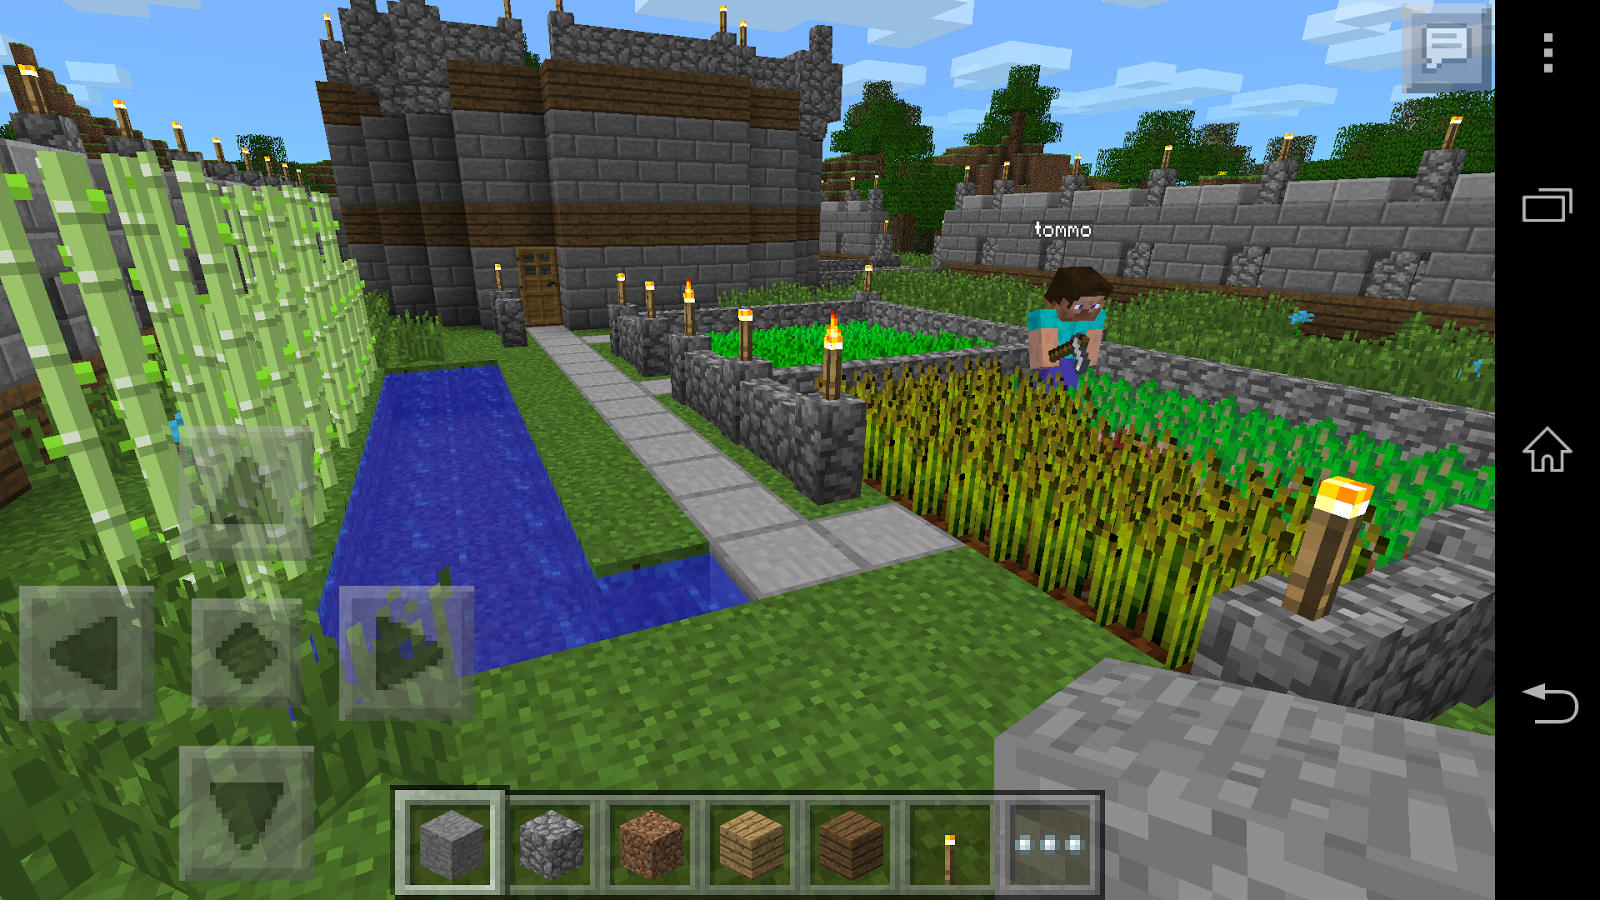 Minecraft pocket edition download for free